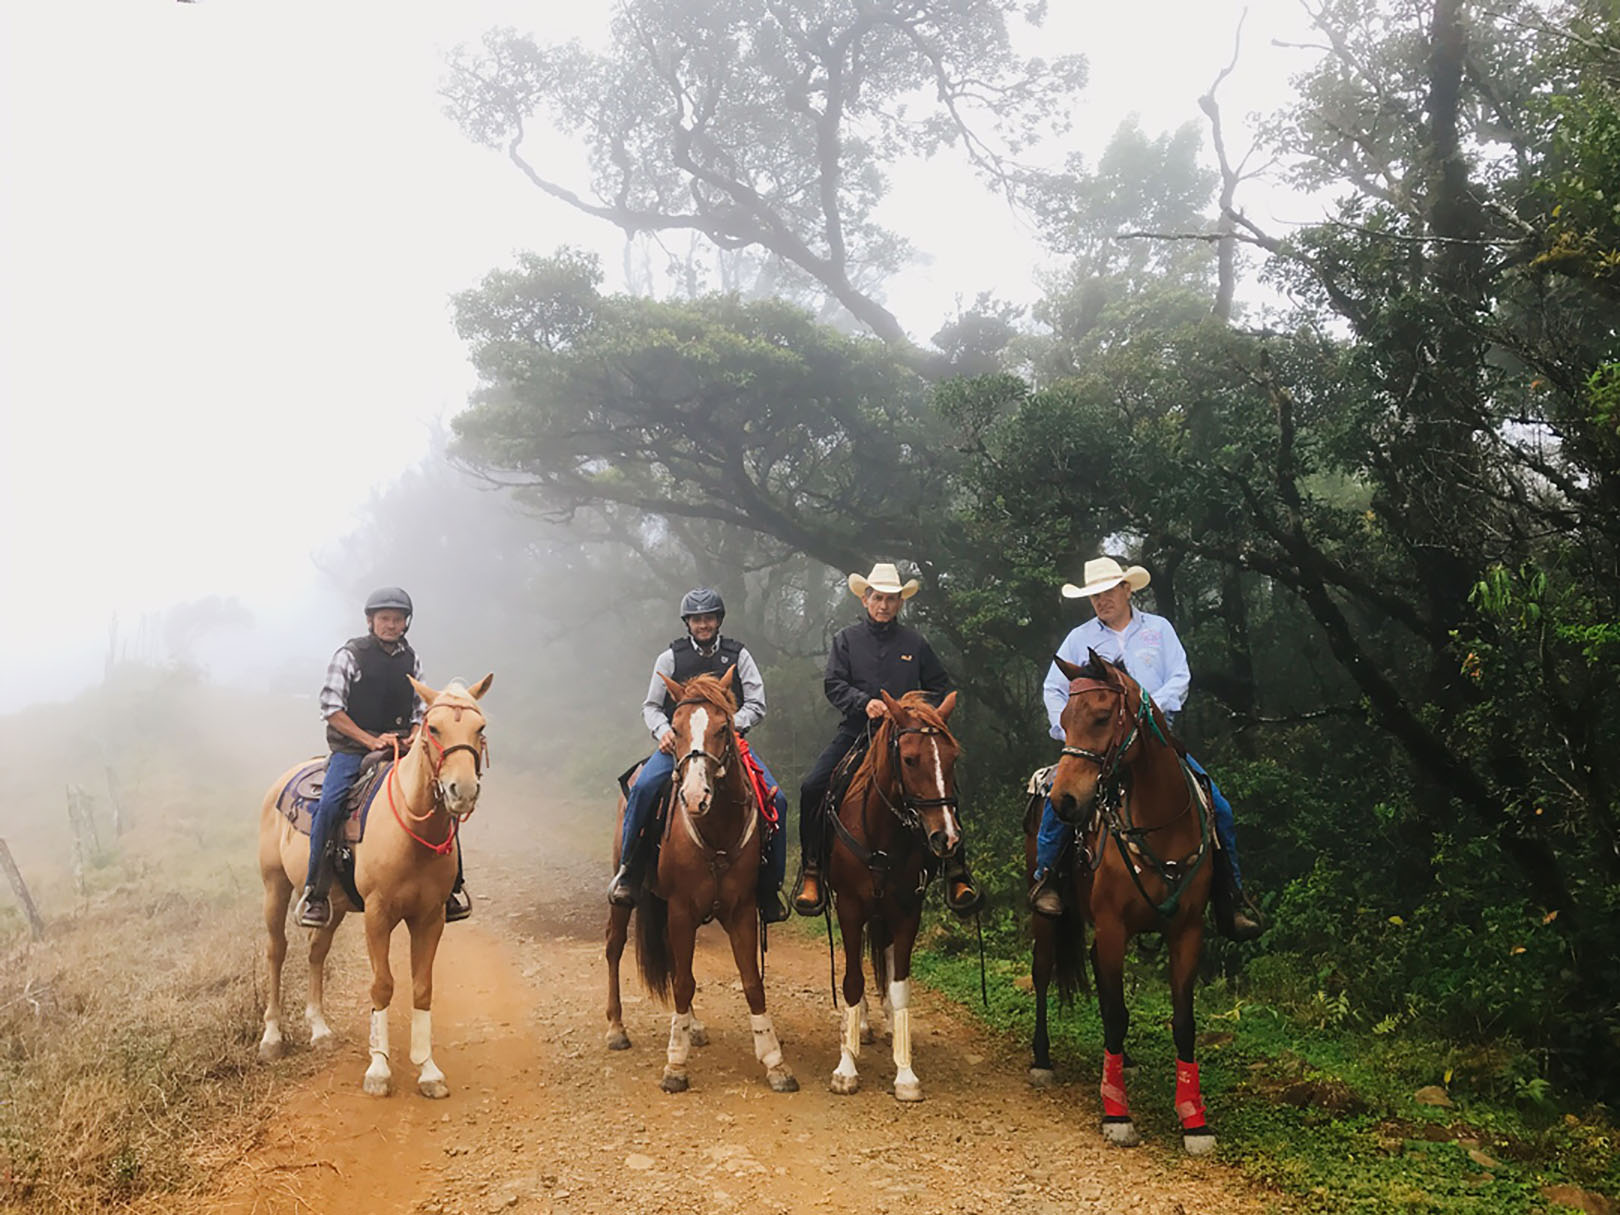 Golden Hills Trail - Costa Rica Horse Riding Holiday